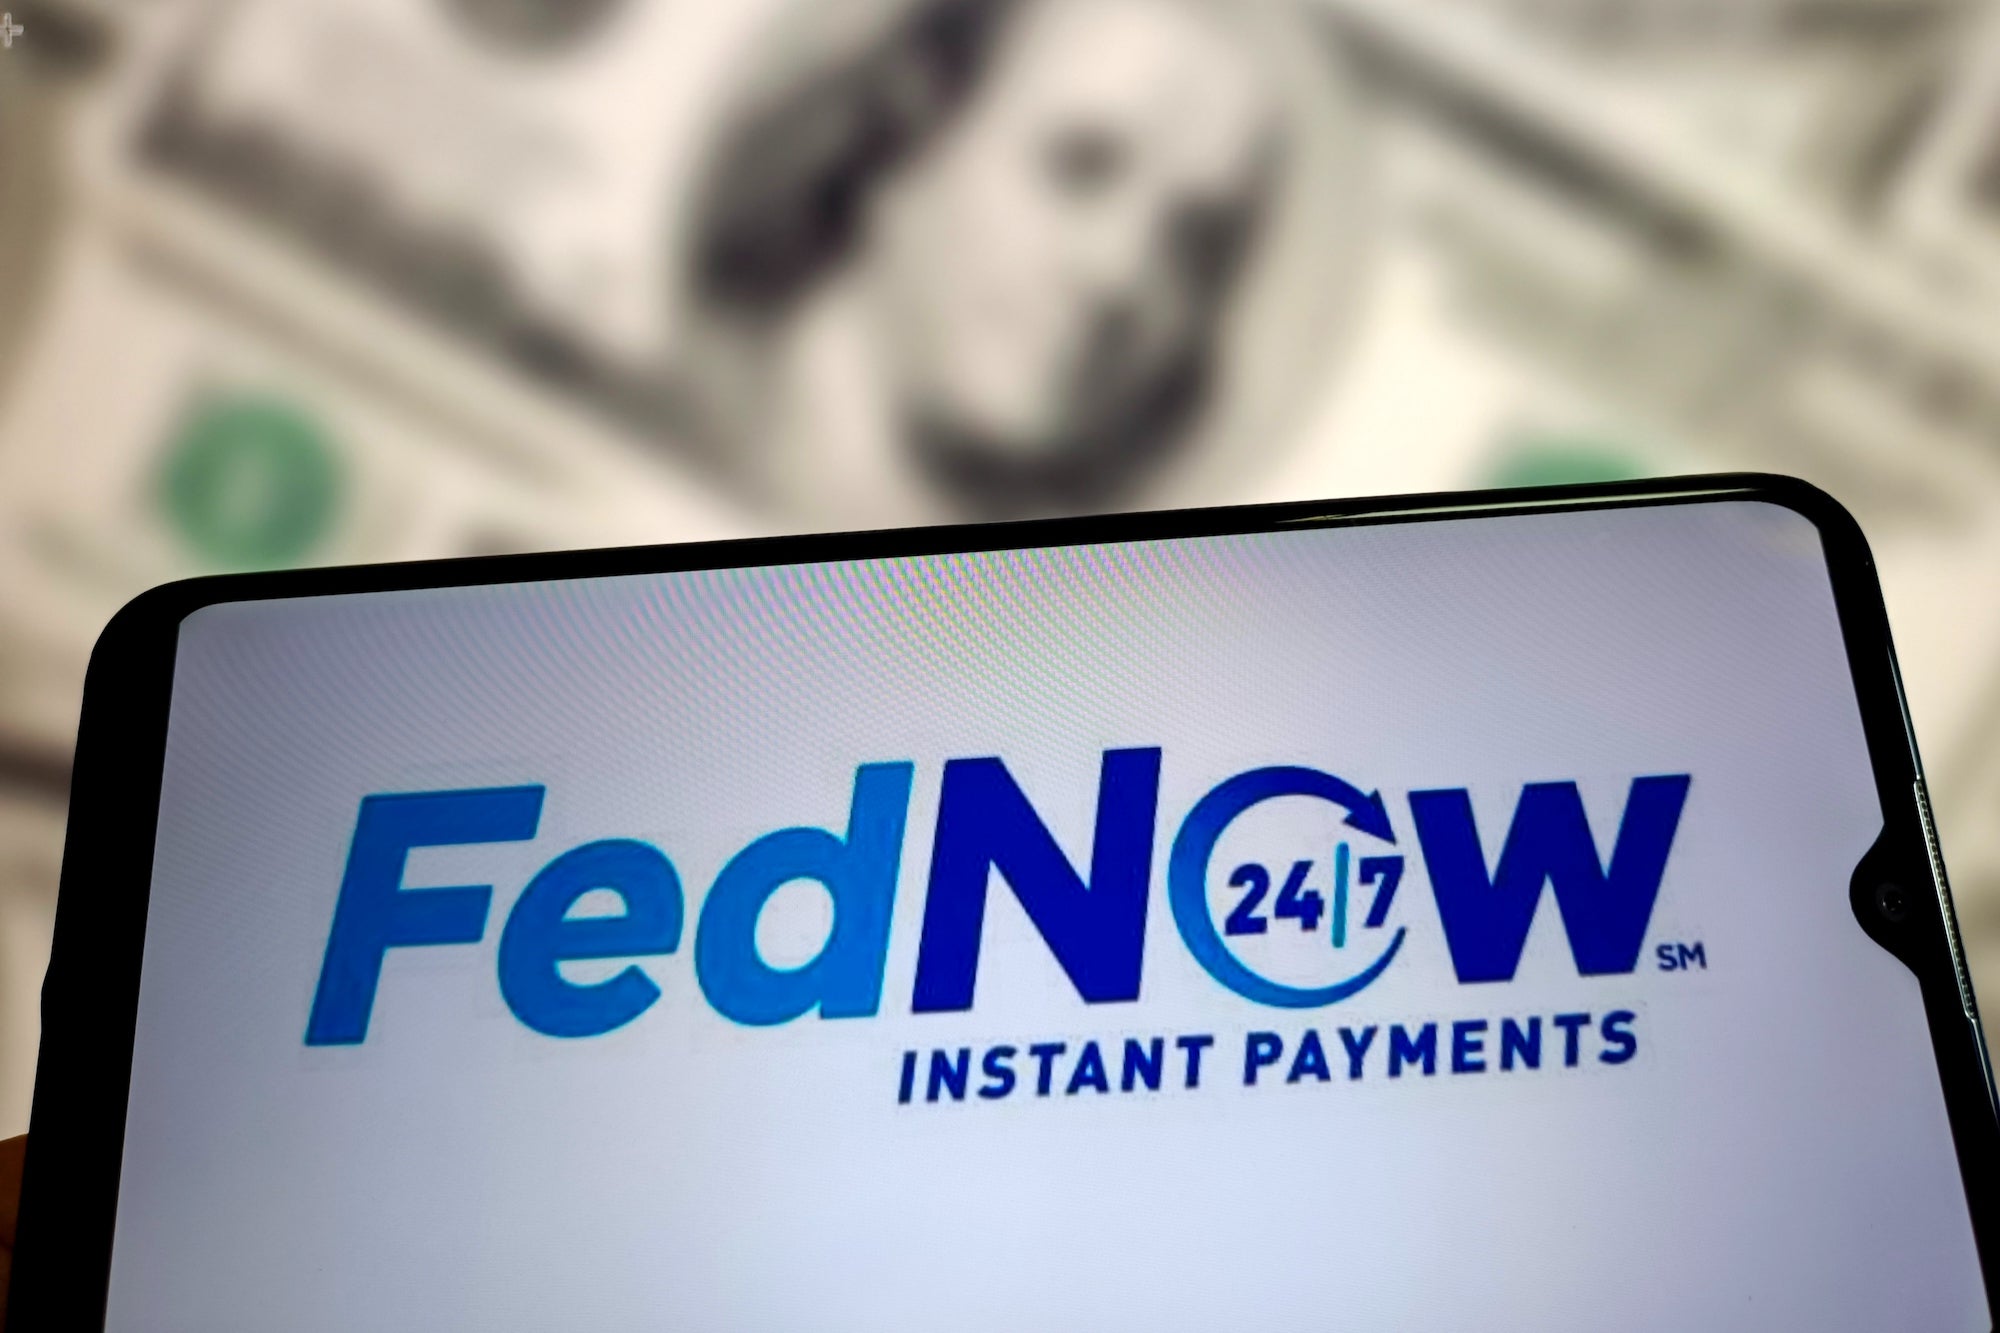 FedNow’s Legal Terms Provide An Opportunity For Digital Wallets And Payment Apps